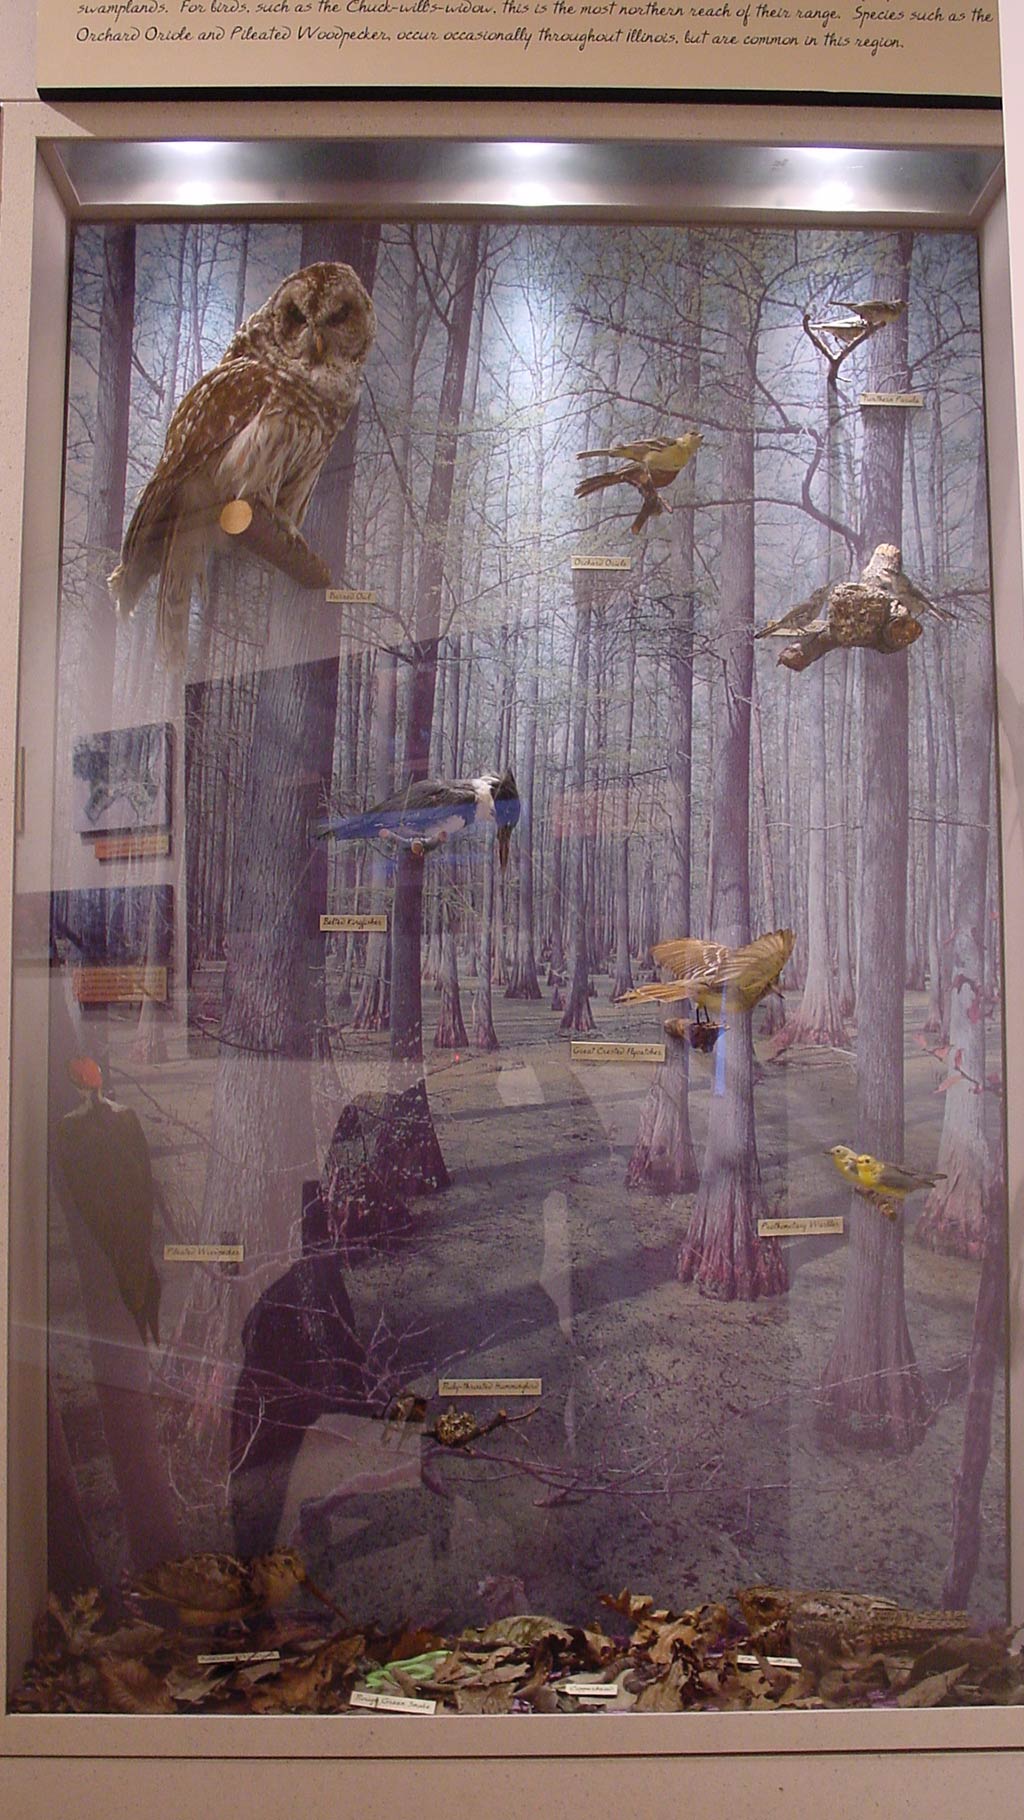 display case with different bird species in the forest